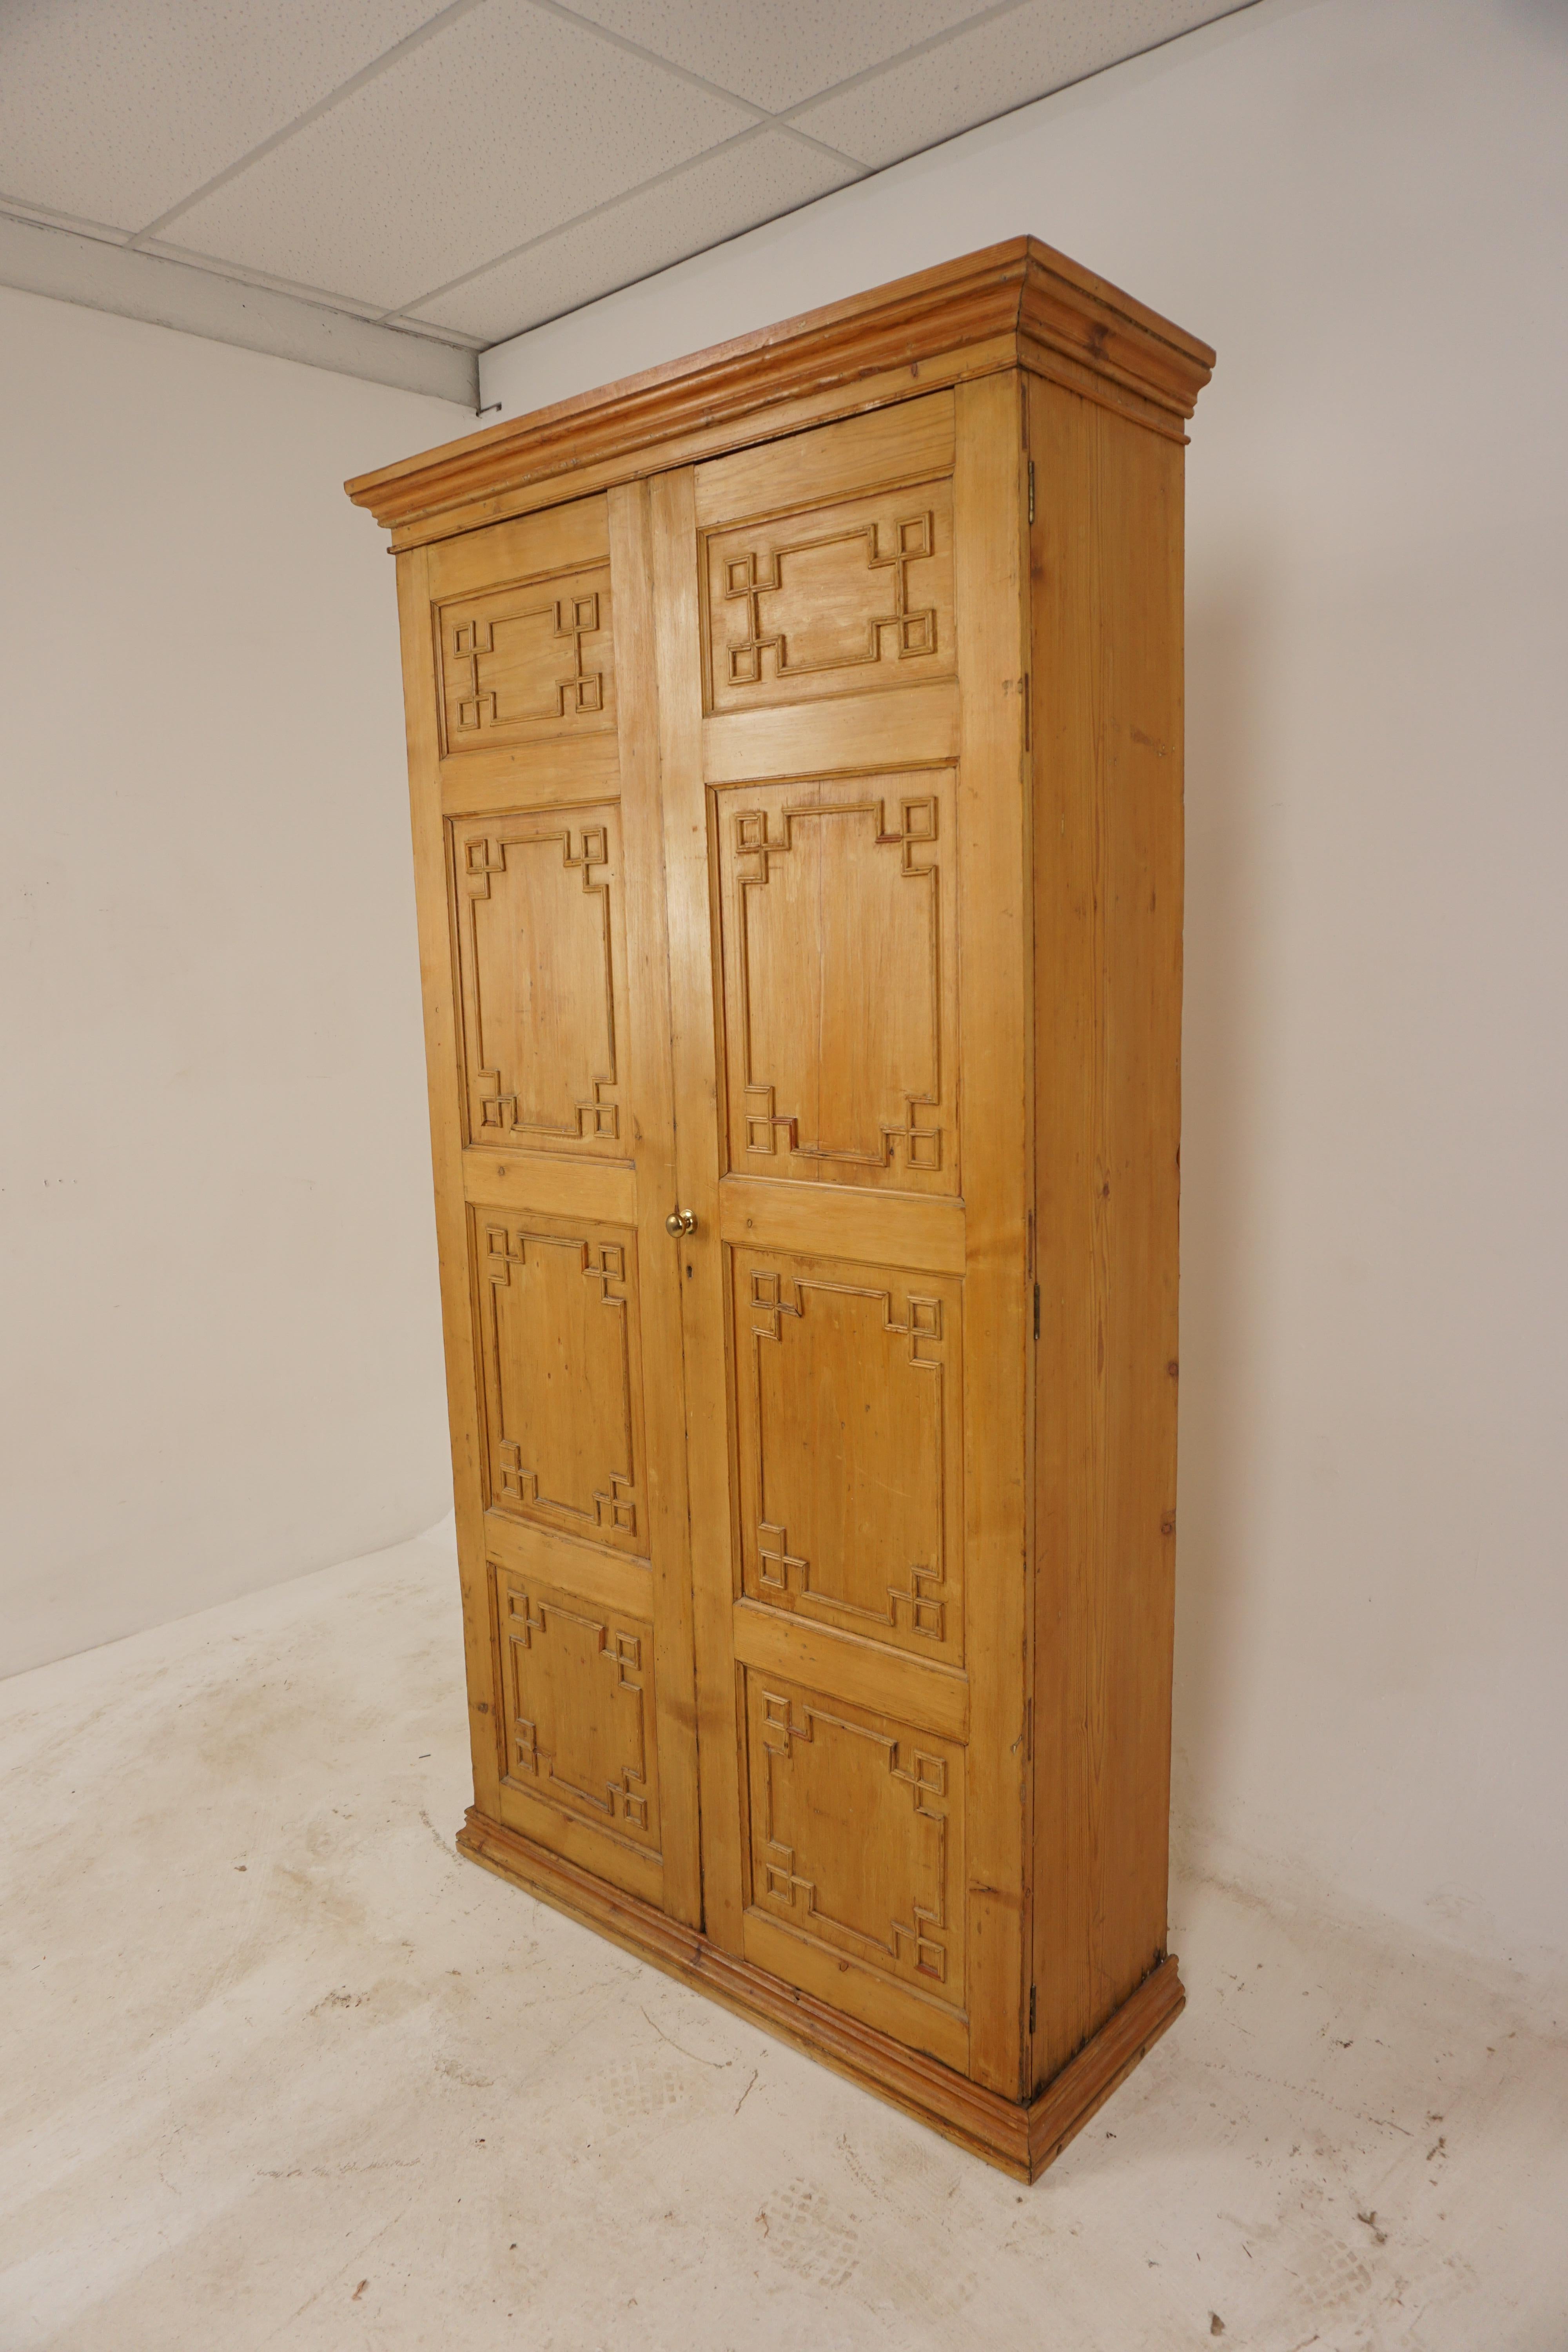 Antique French pine armoire, wardrobe closet, France 1880, B2879A

France 1880
Solid Pine
Original finish
Moulded cornice on top.
Pair of paneled doors.
Open to reveal three adjustable shelves. (two original)
Brass knob
All standing on a plinth